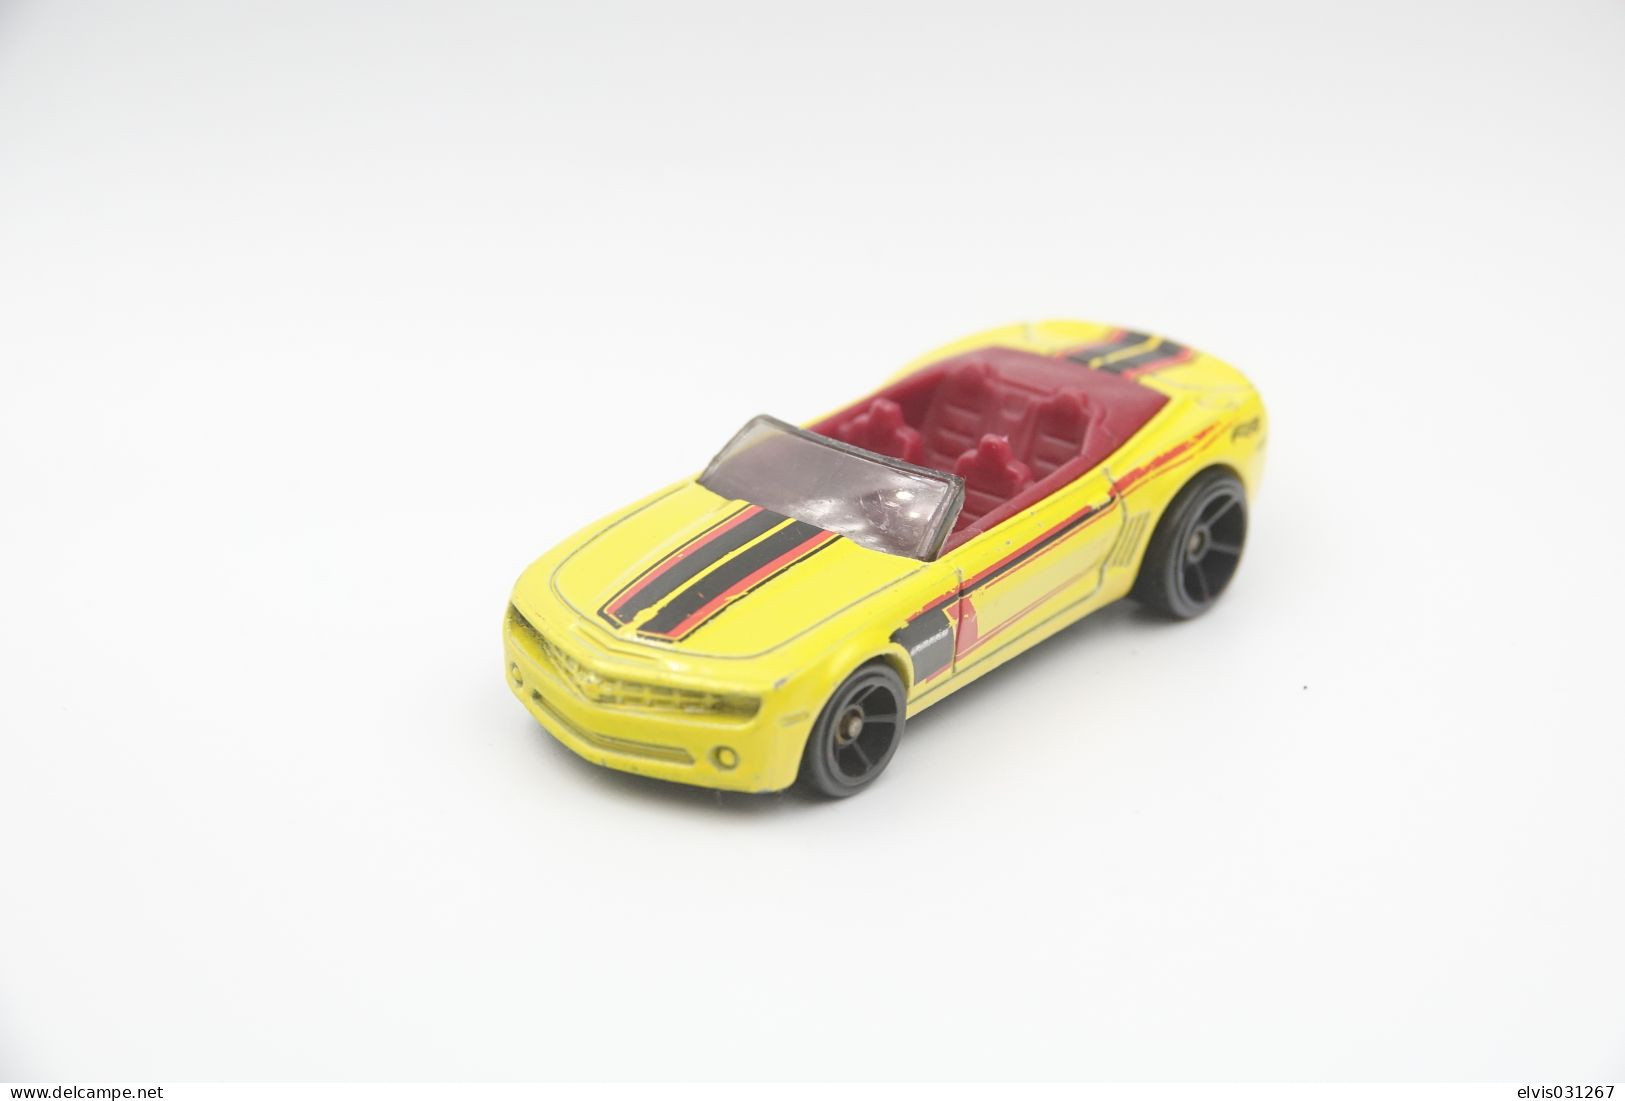 Hot Wheels Mattel Camaro Convertible Concept -  Issued 2017, Scale 1/64 - Matchbox (Lesney)